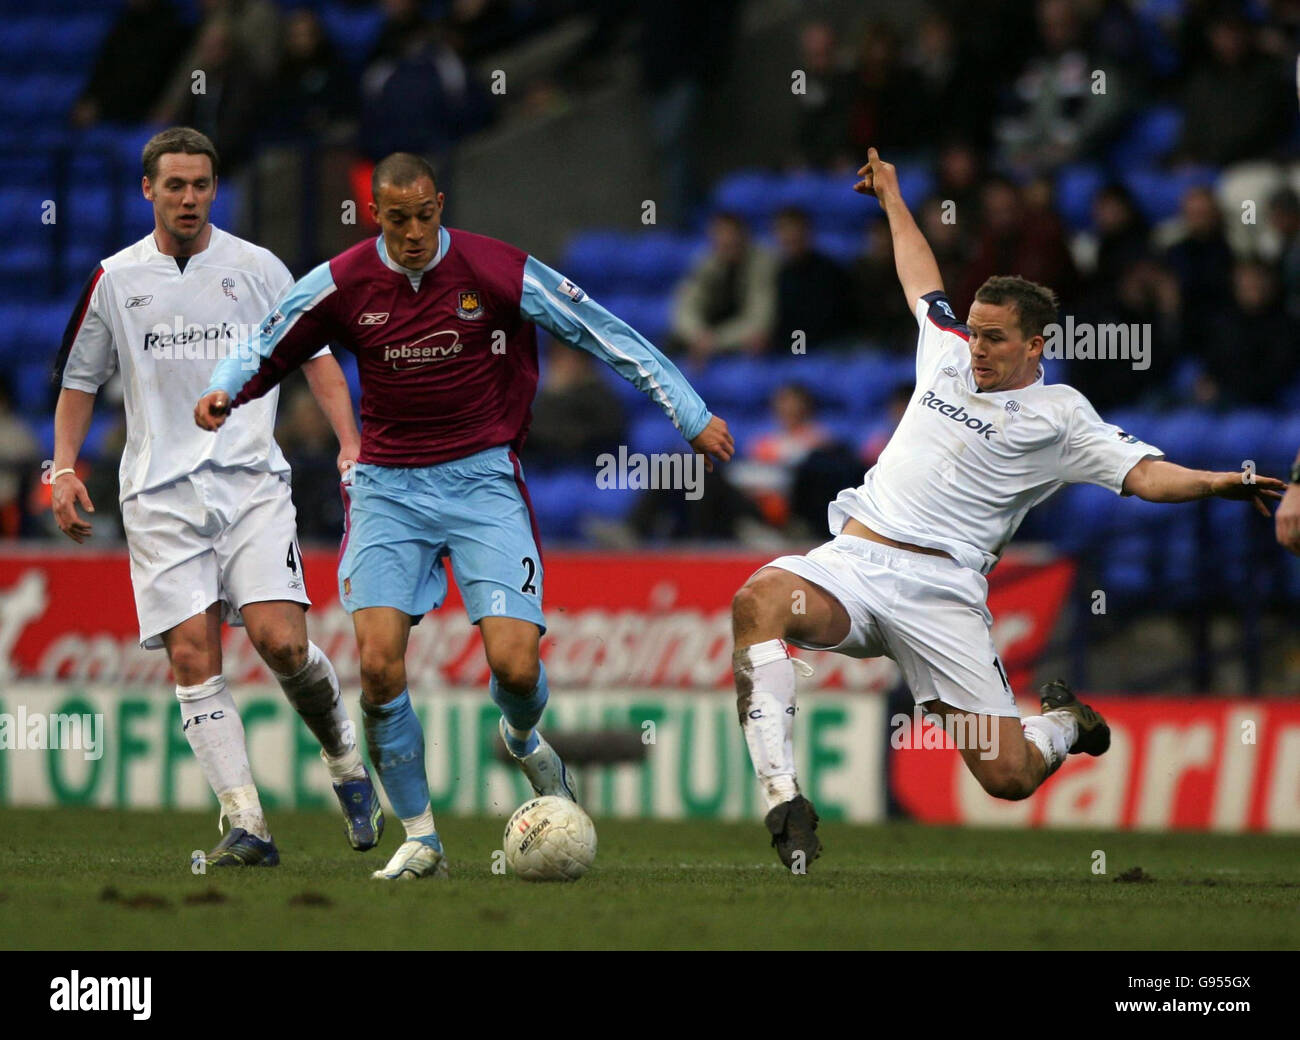 West Ham United's Bobby Zamora (C) skips past a tackle from Bolton Wanderers Kevin Davies during the FA Cup fifth round match at the Reebok Stadium, Bolton, Saturday February 18, 2006. PRESS ASSOCIATION Photo. Photo credit should read: Nick Potts/PA. Stock Photo